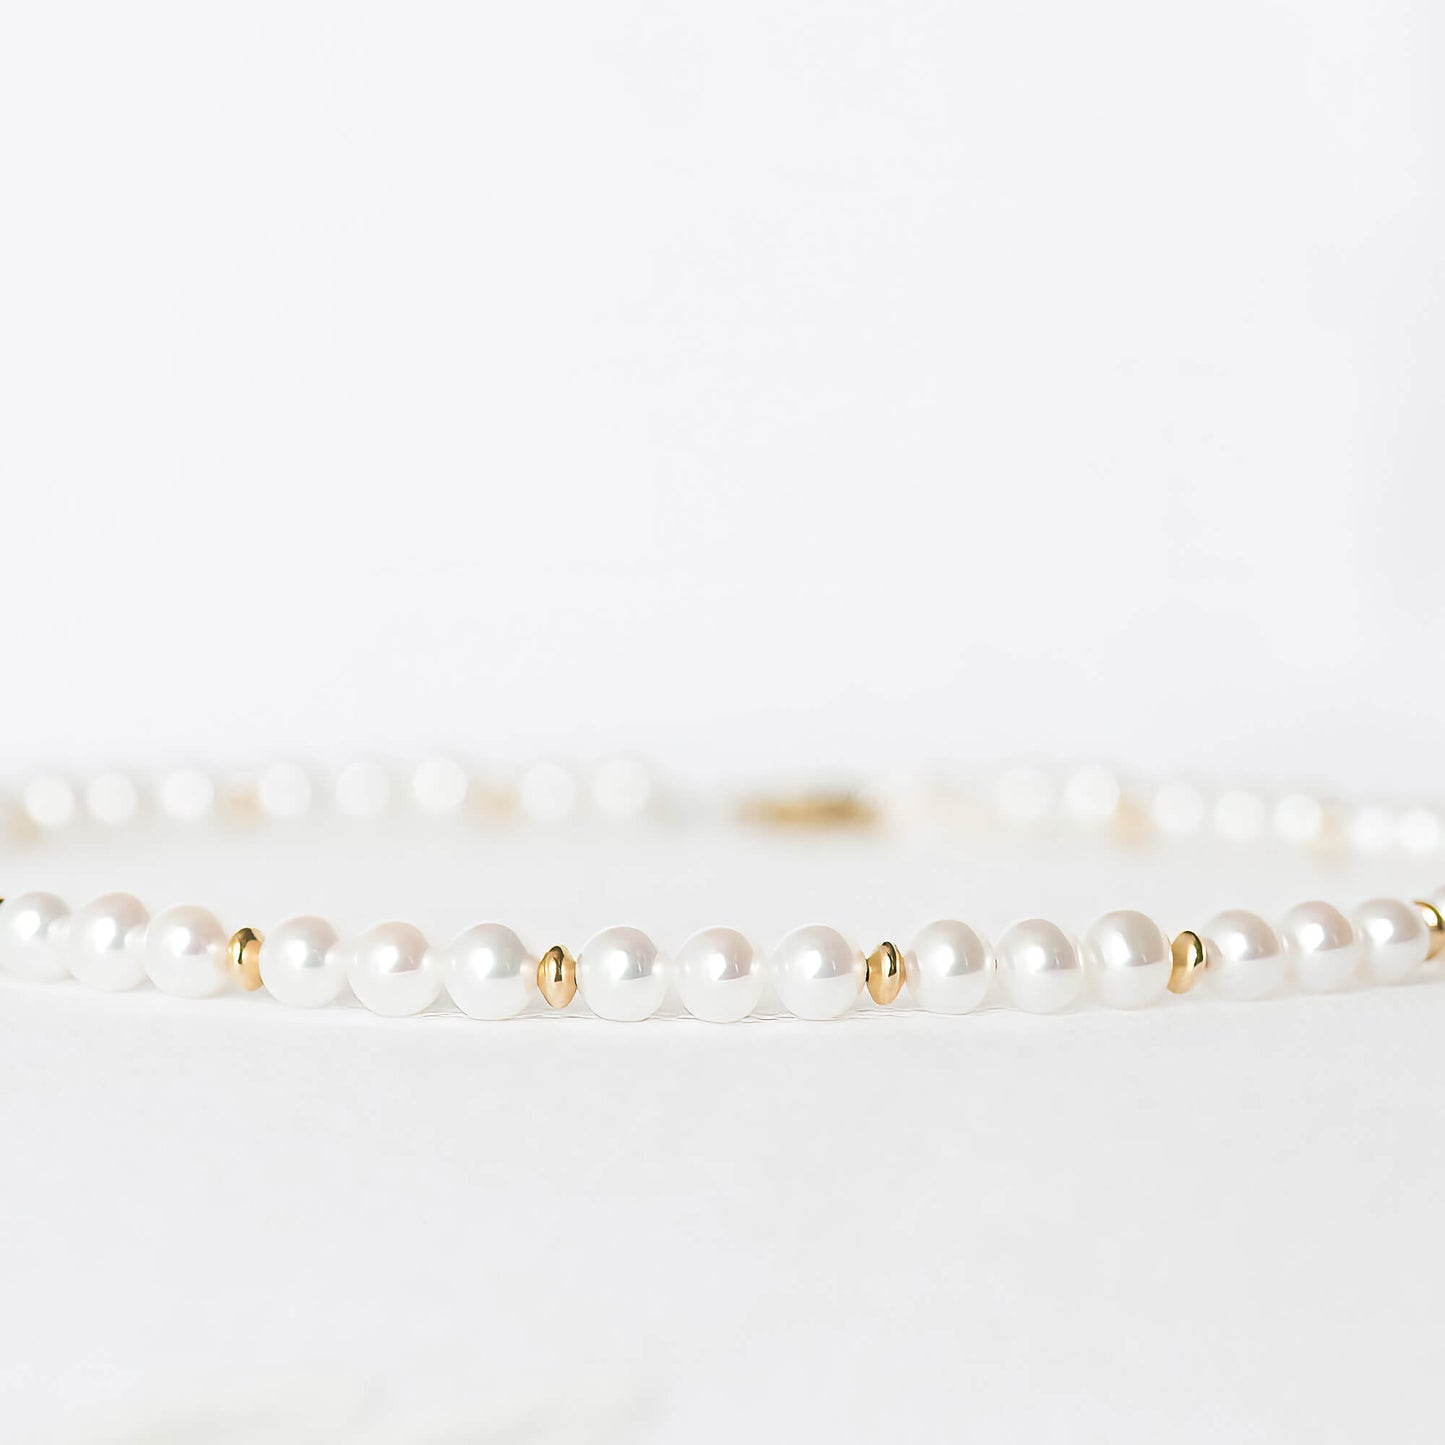 Golden Lovely Pearl Necklace